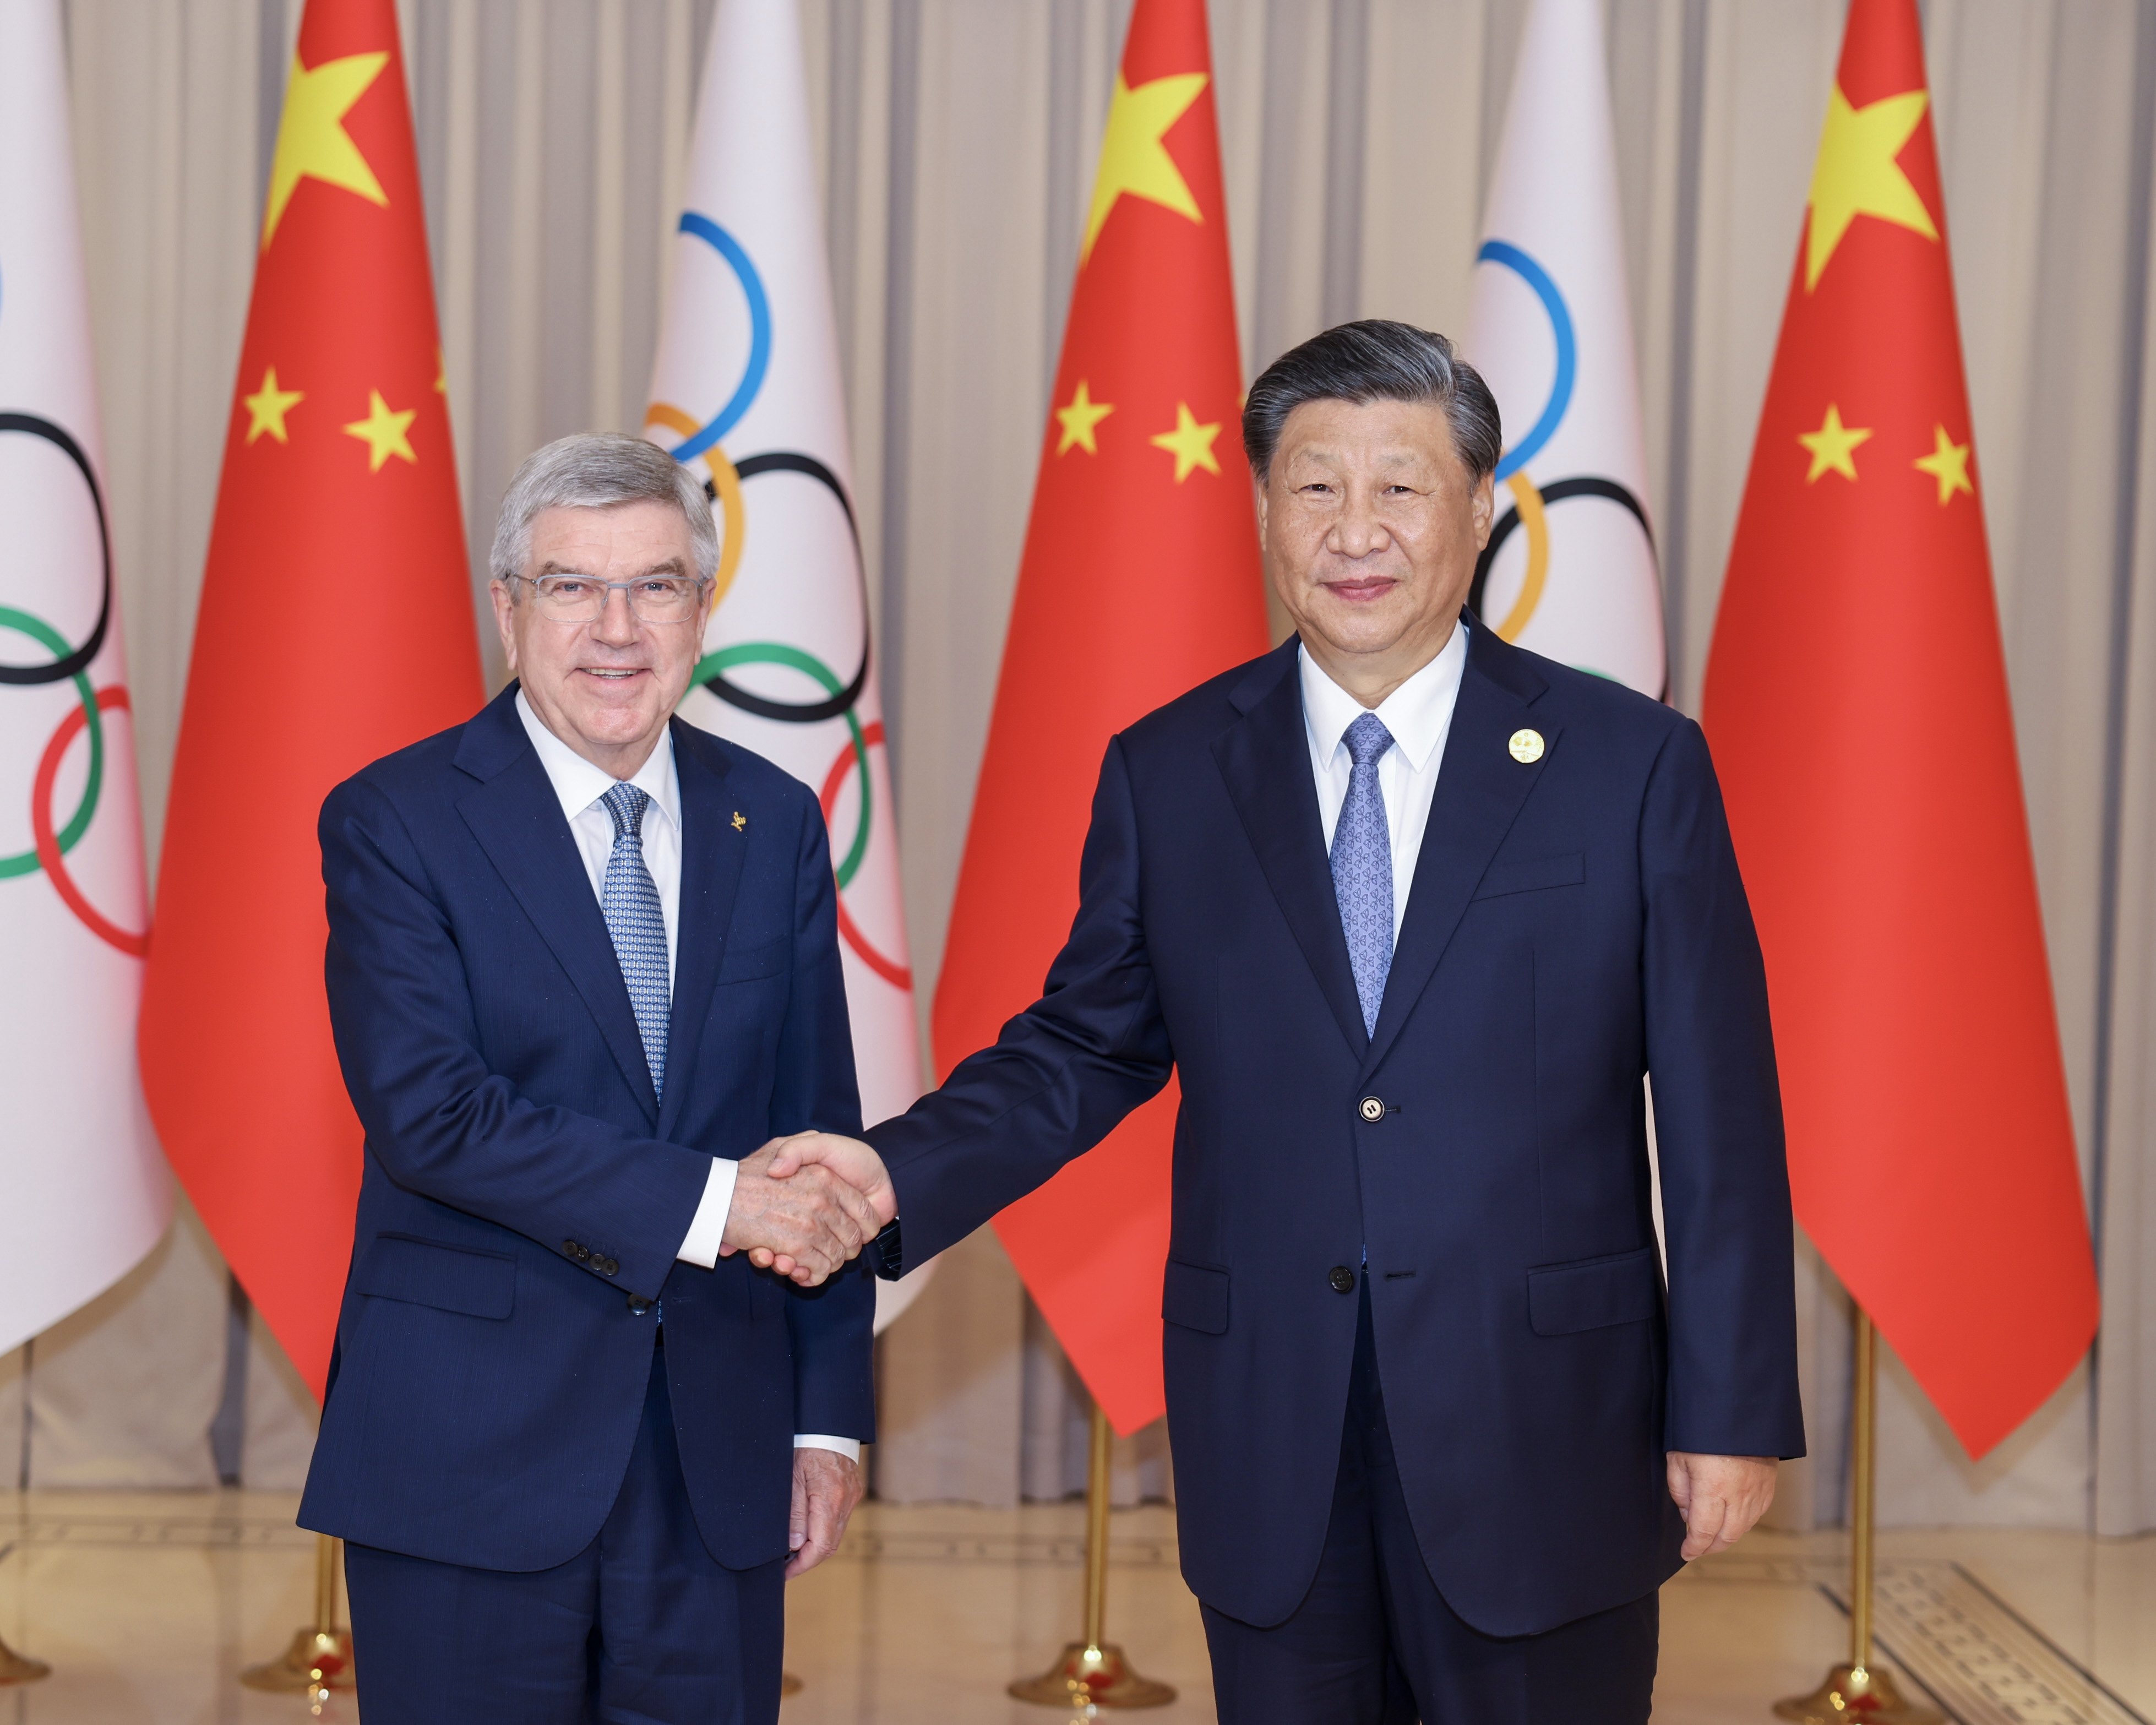 Chinese President Xi Jinping meets with International Olympic Committee chief Thomas Bach in Hangzhou. Photo: Xinhua